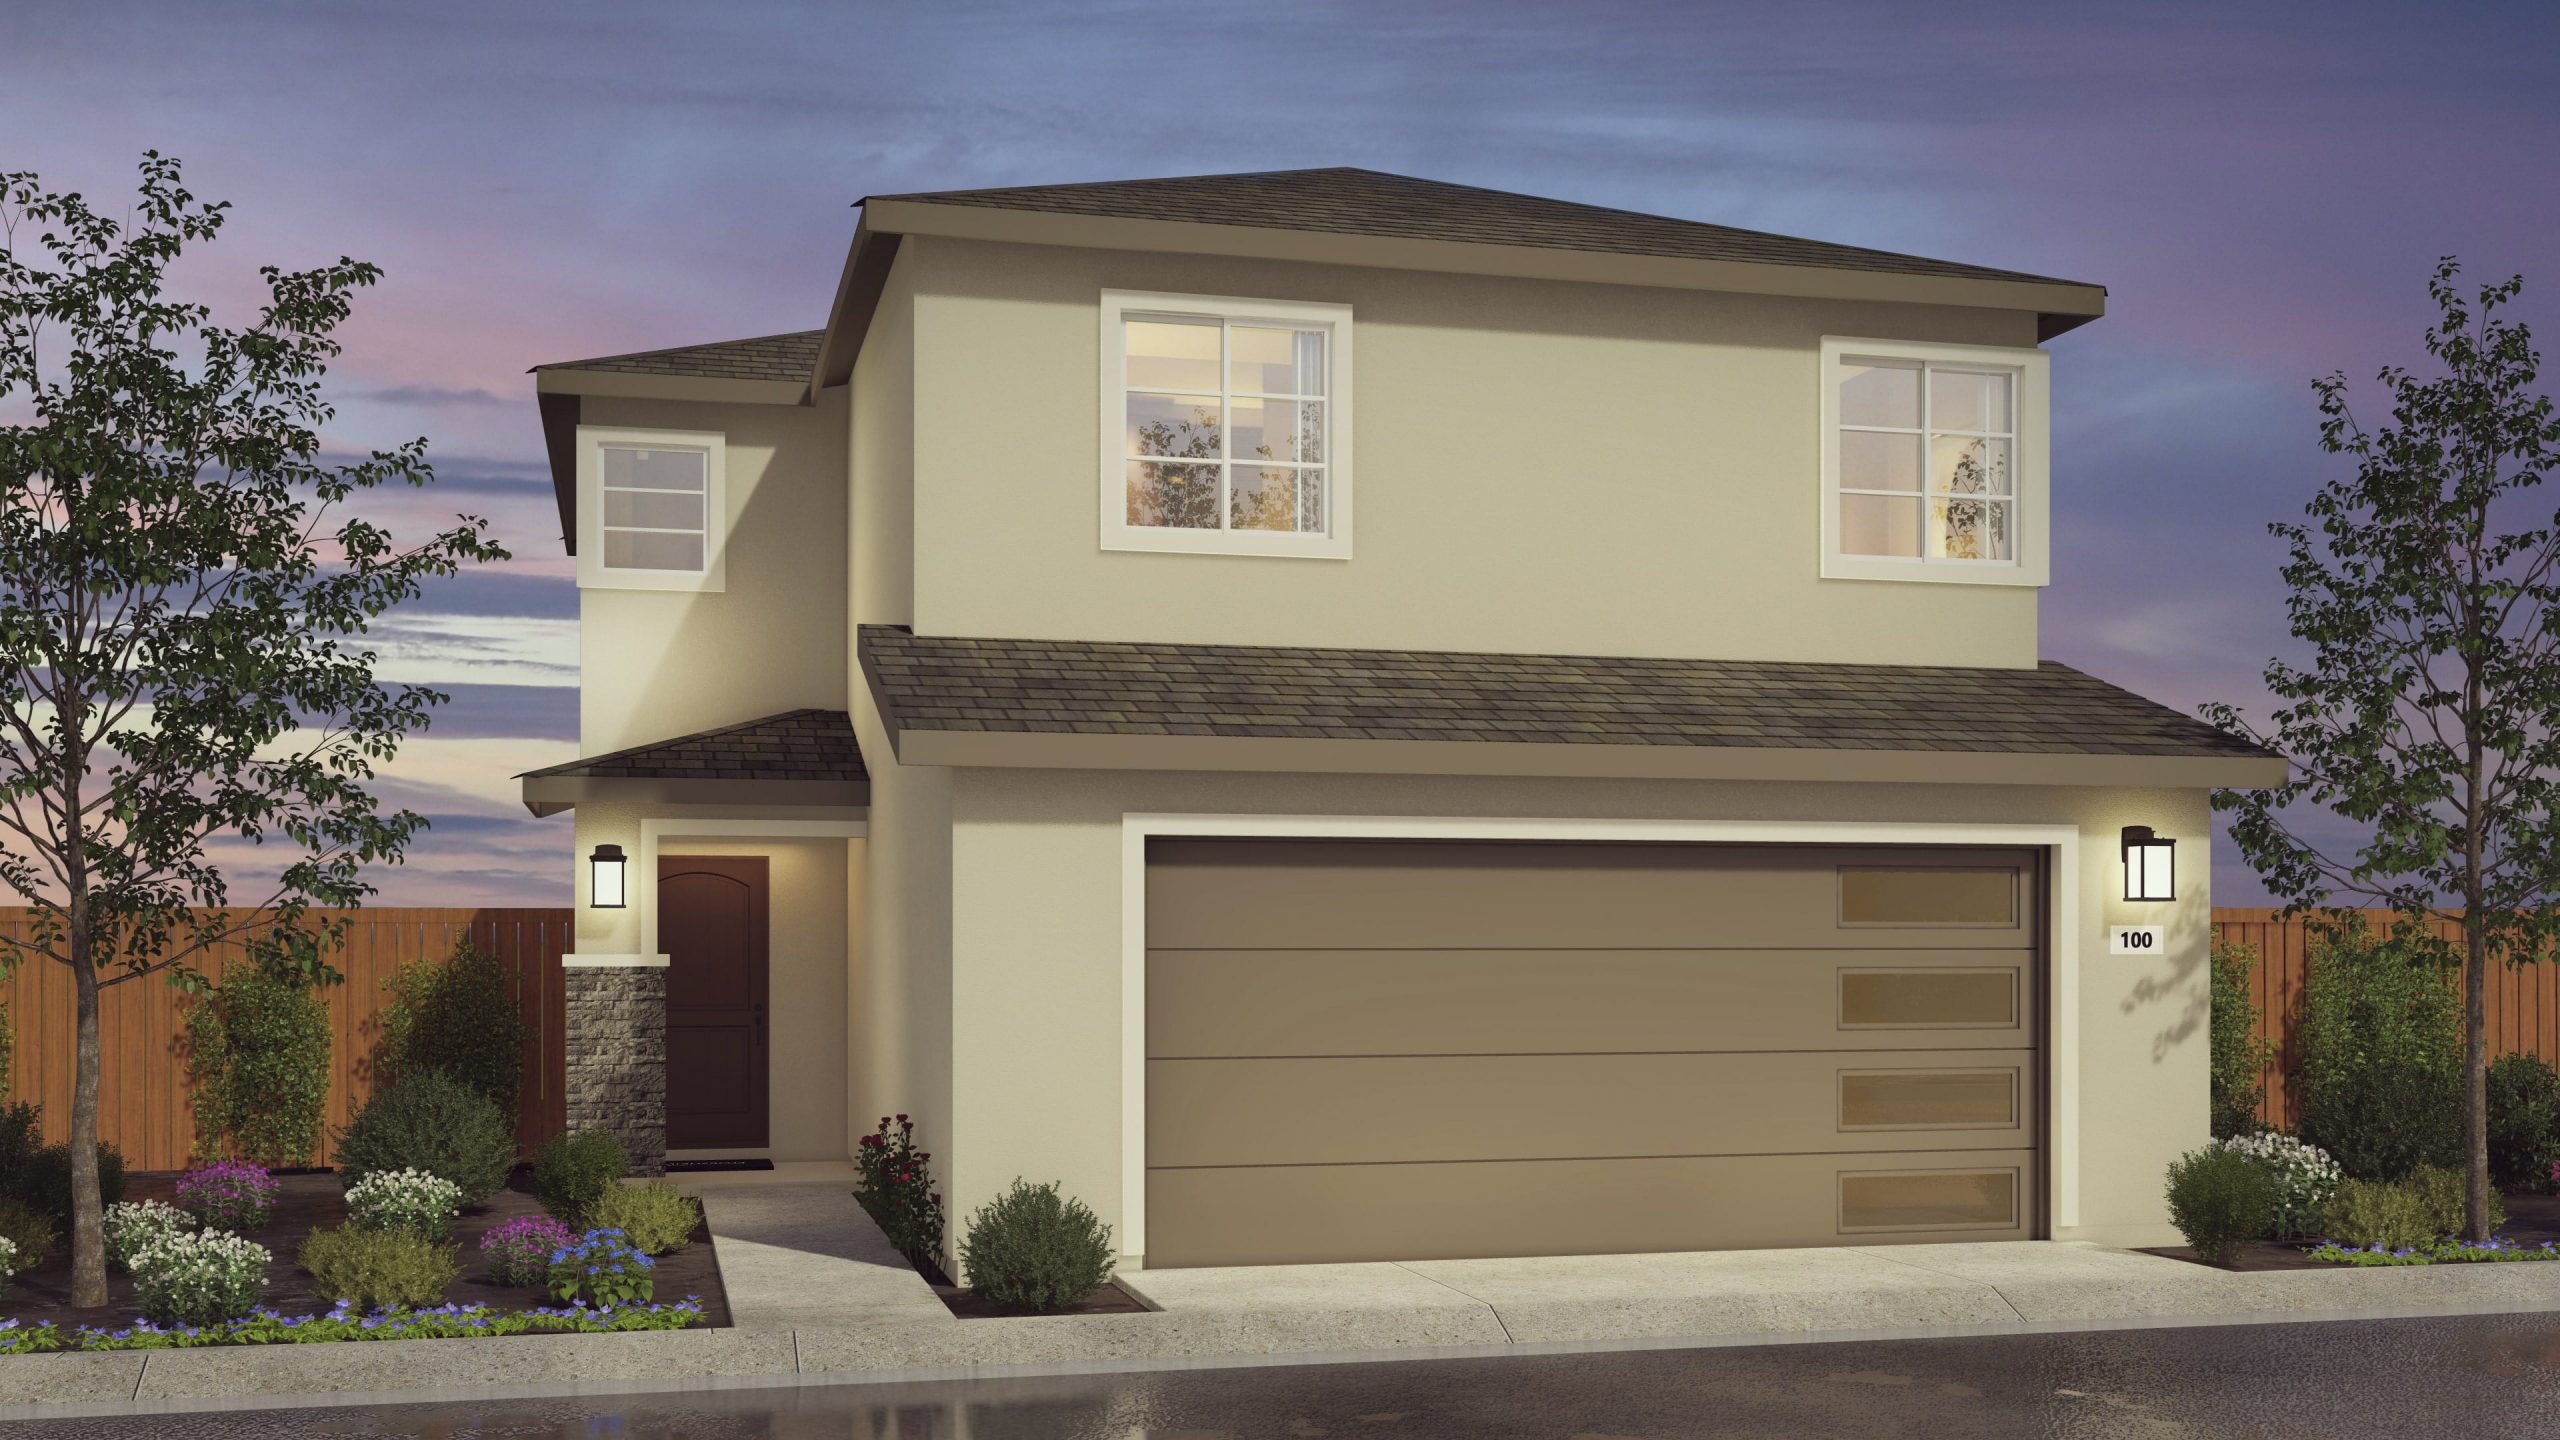 Florsheim Homes Fifth Edition optional elevations